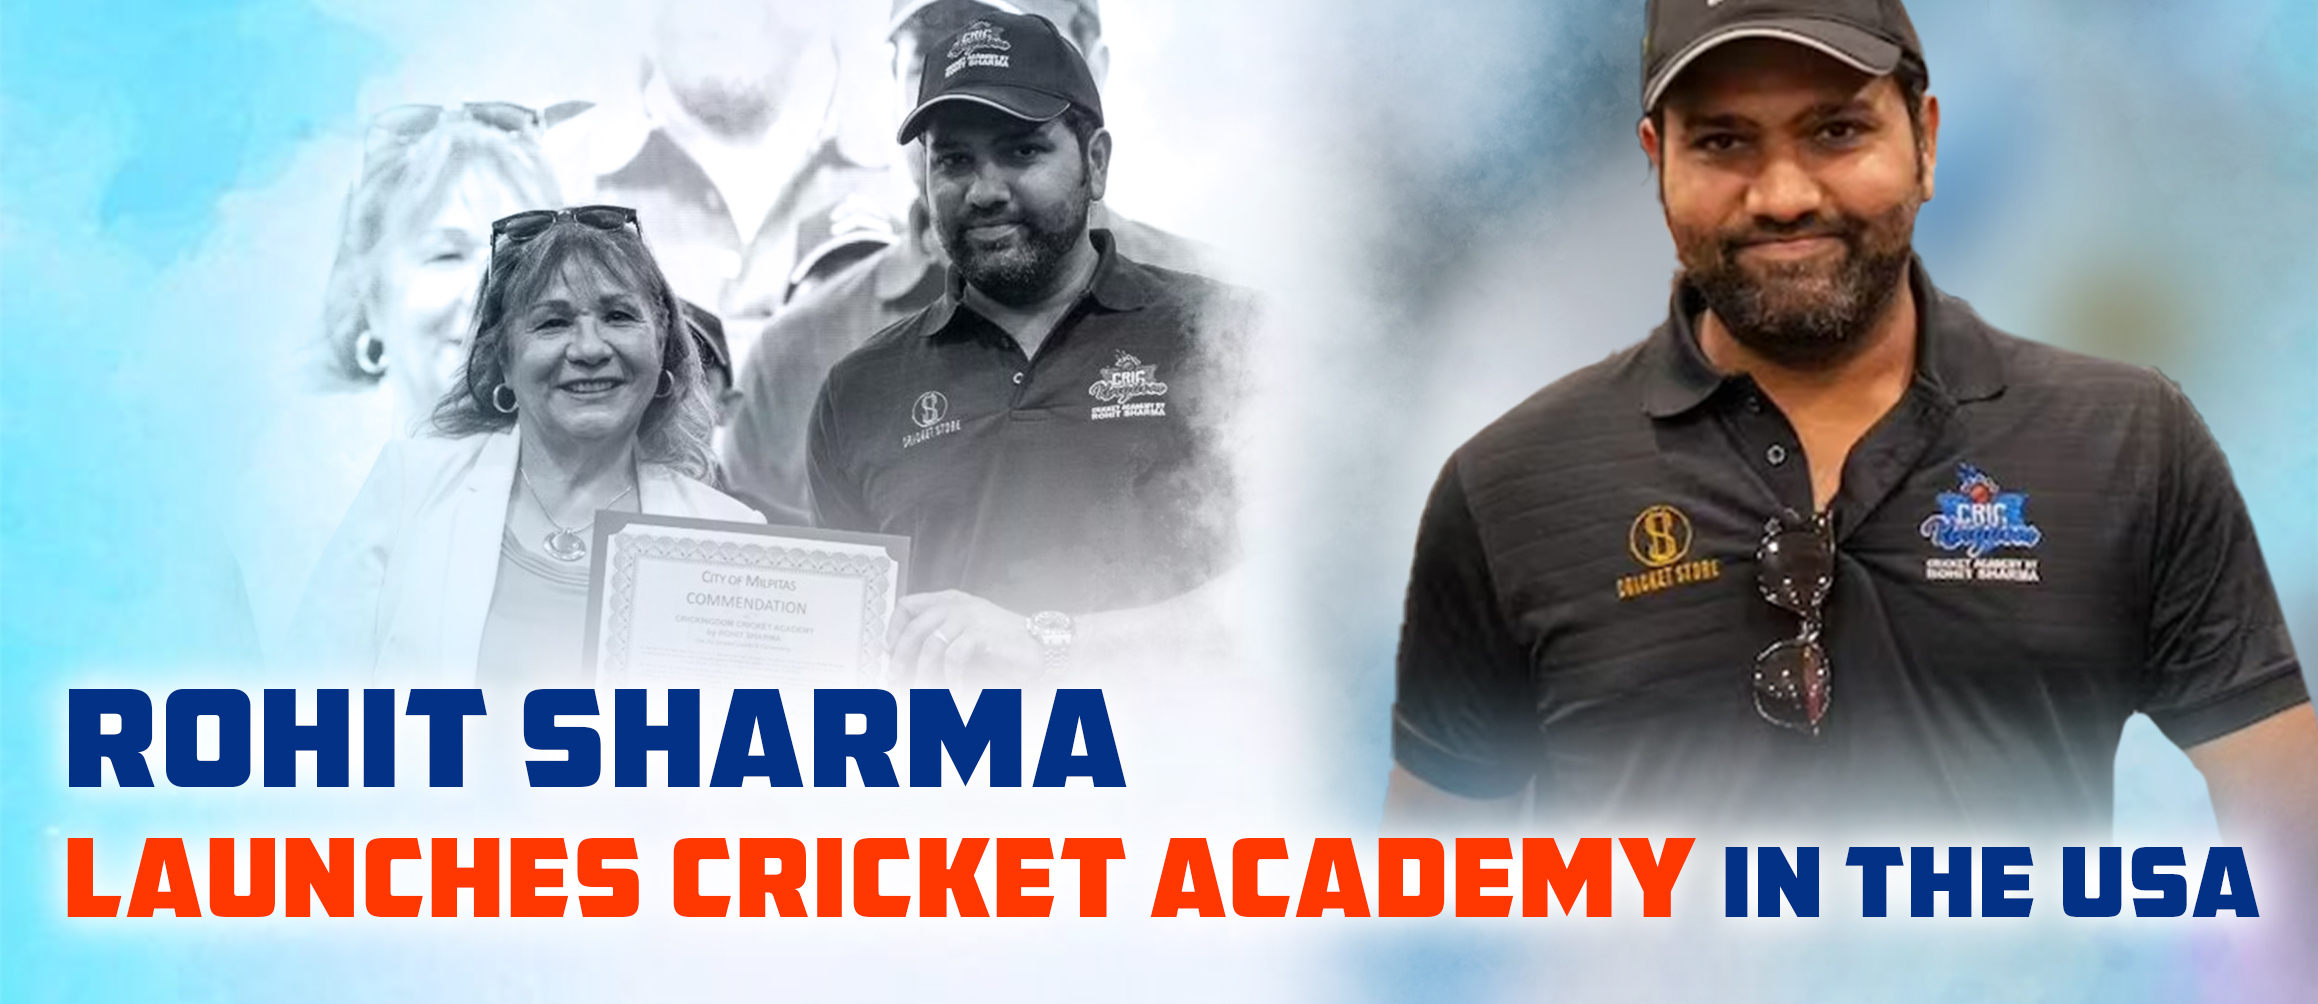 Rohit Sharma Launches Cricket Academy in the USA